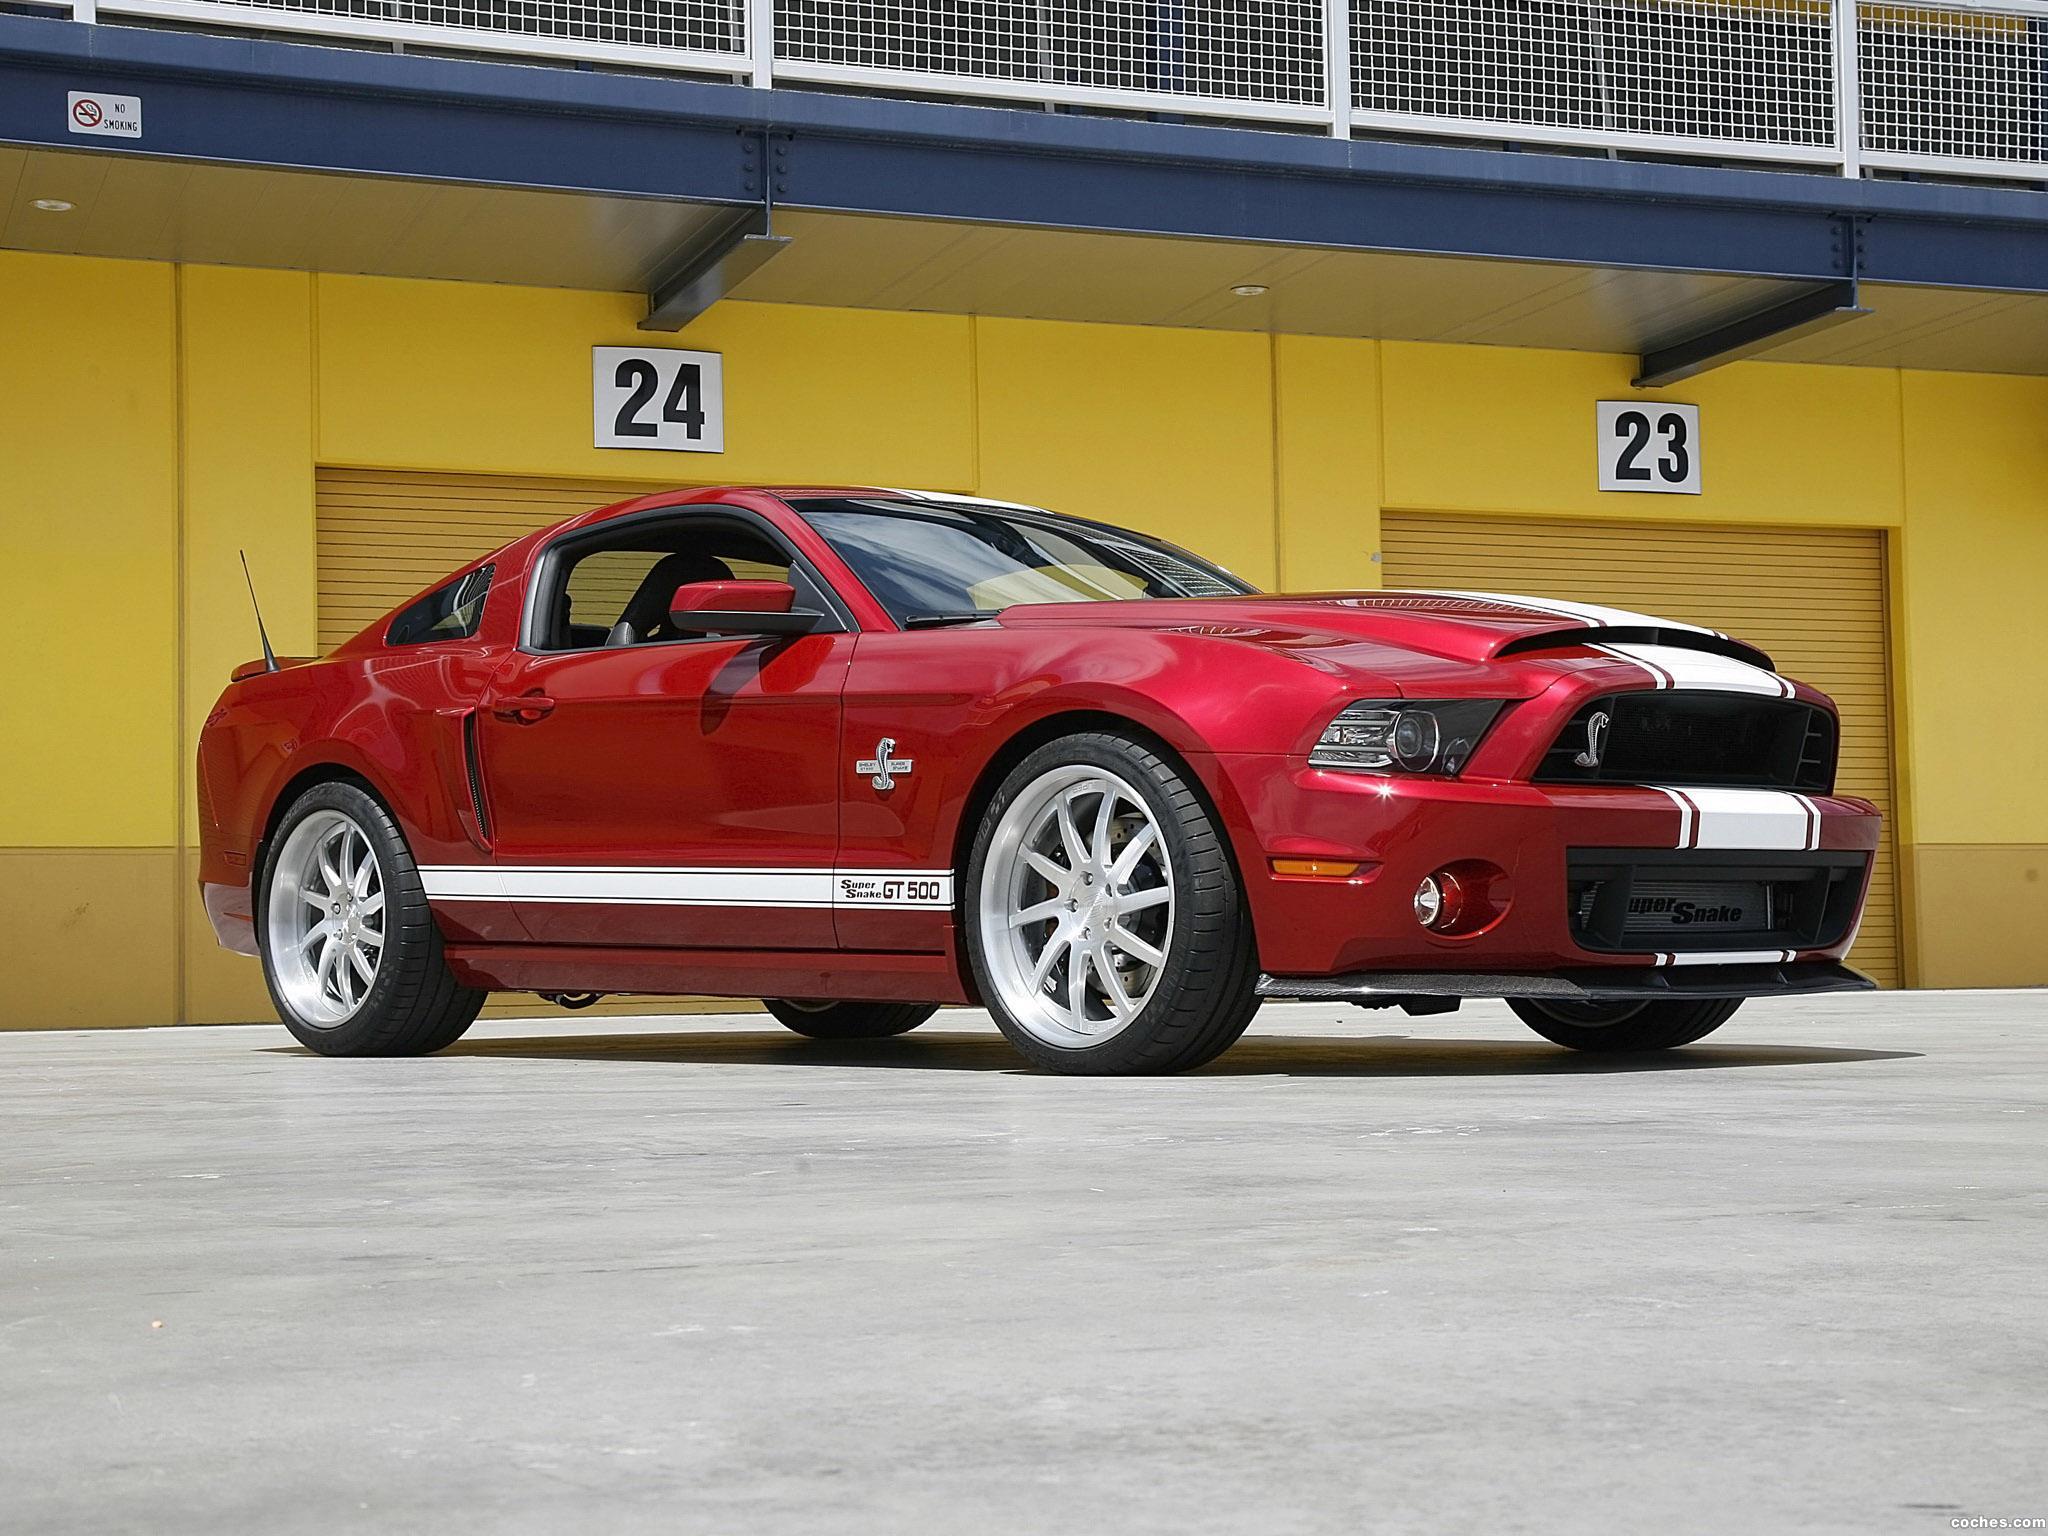 2013 Ford mustang shelby gt500 super snake videos #3